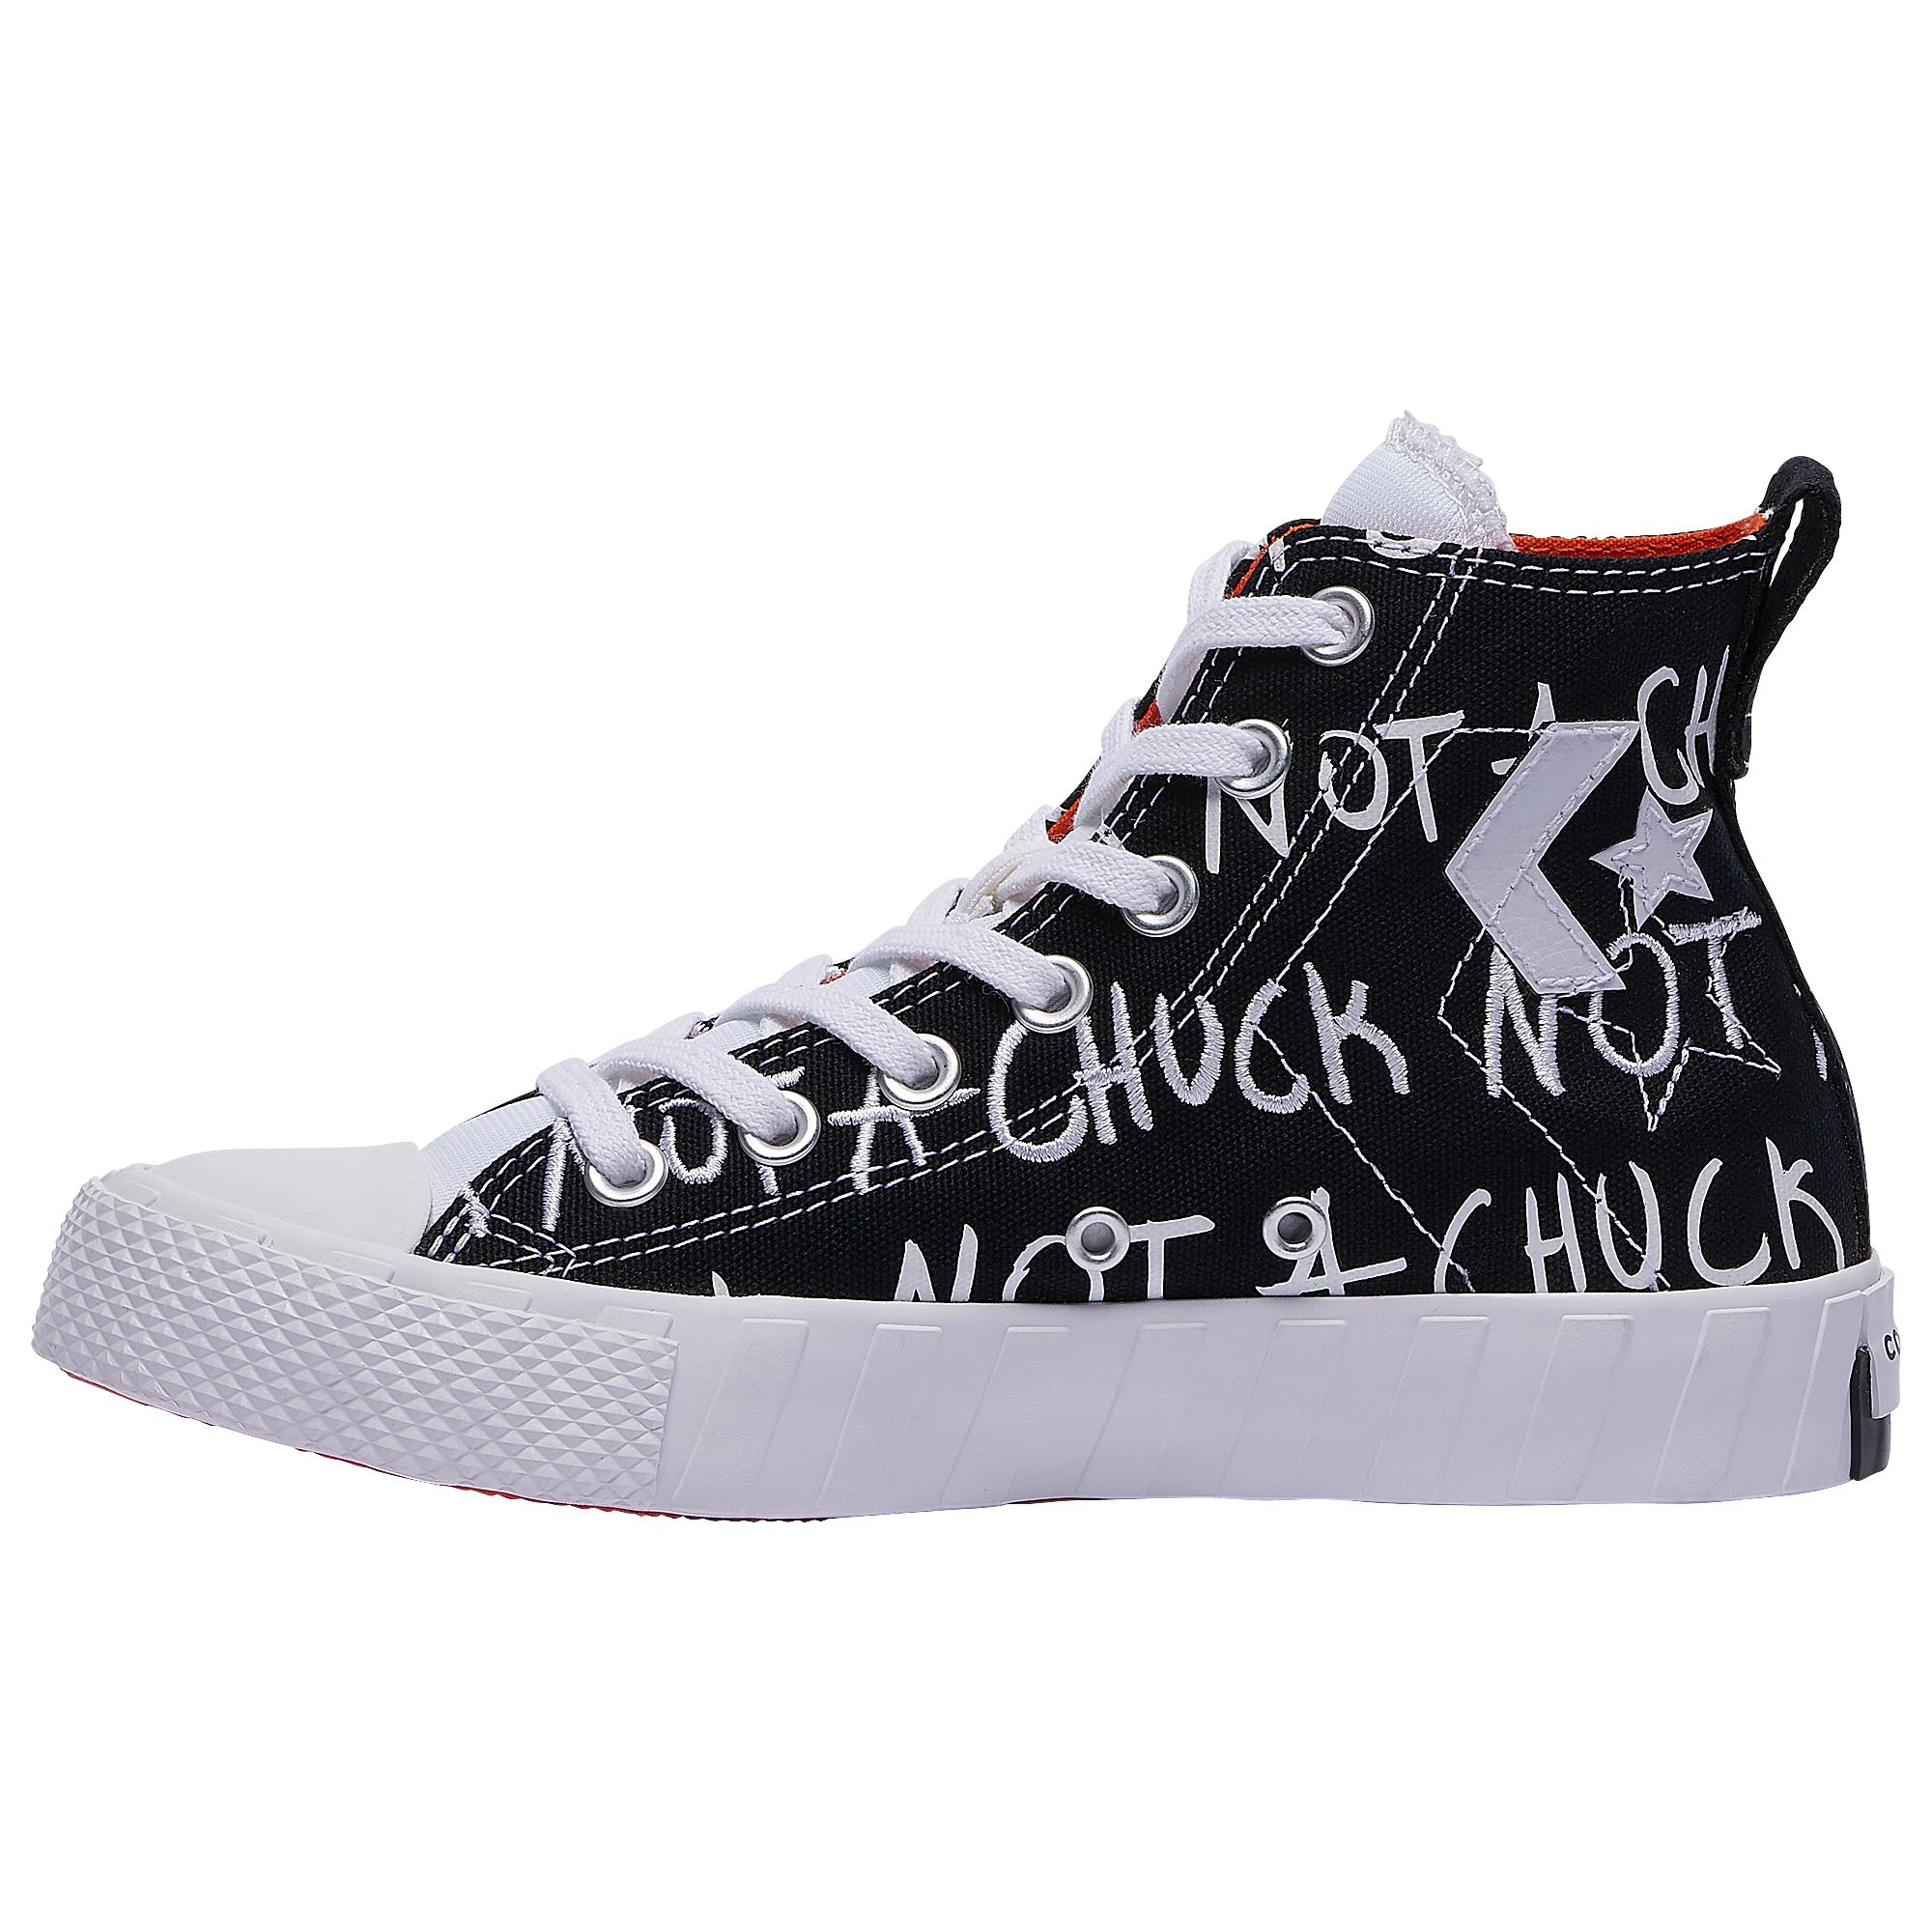 Converse Canvas Unt1tl3d Hi Basketball Shoes in Black/White (Black) for ...